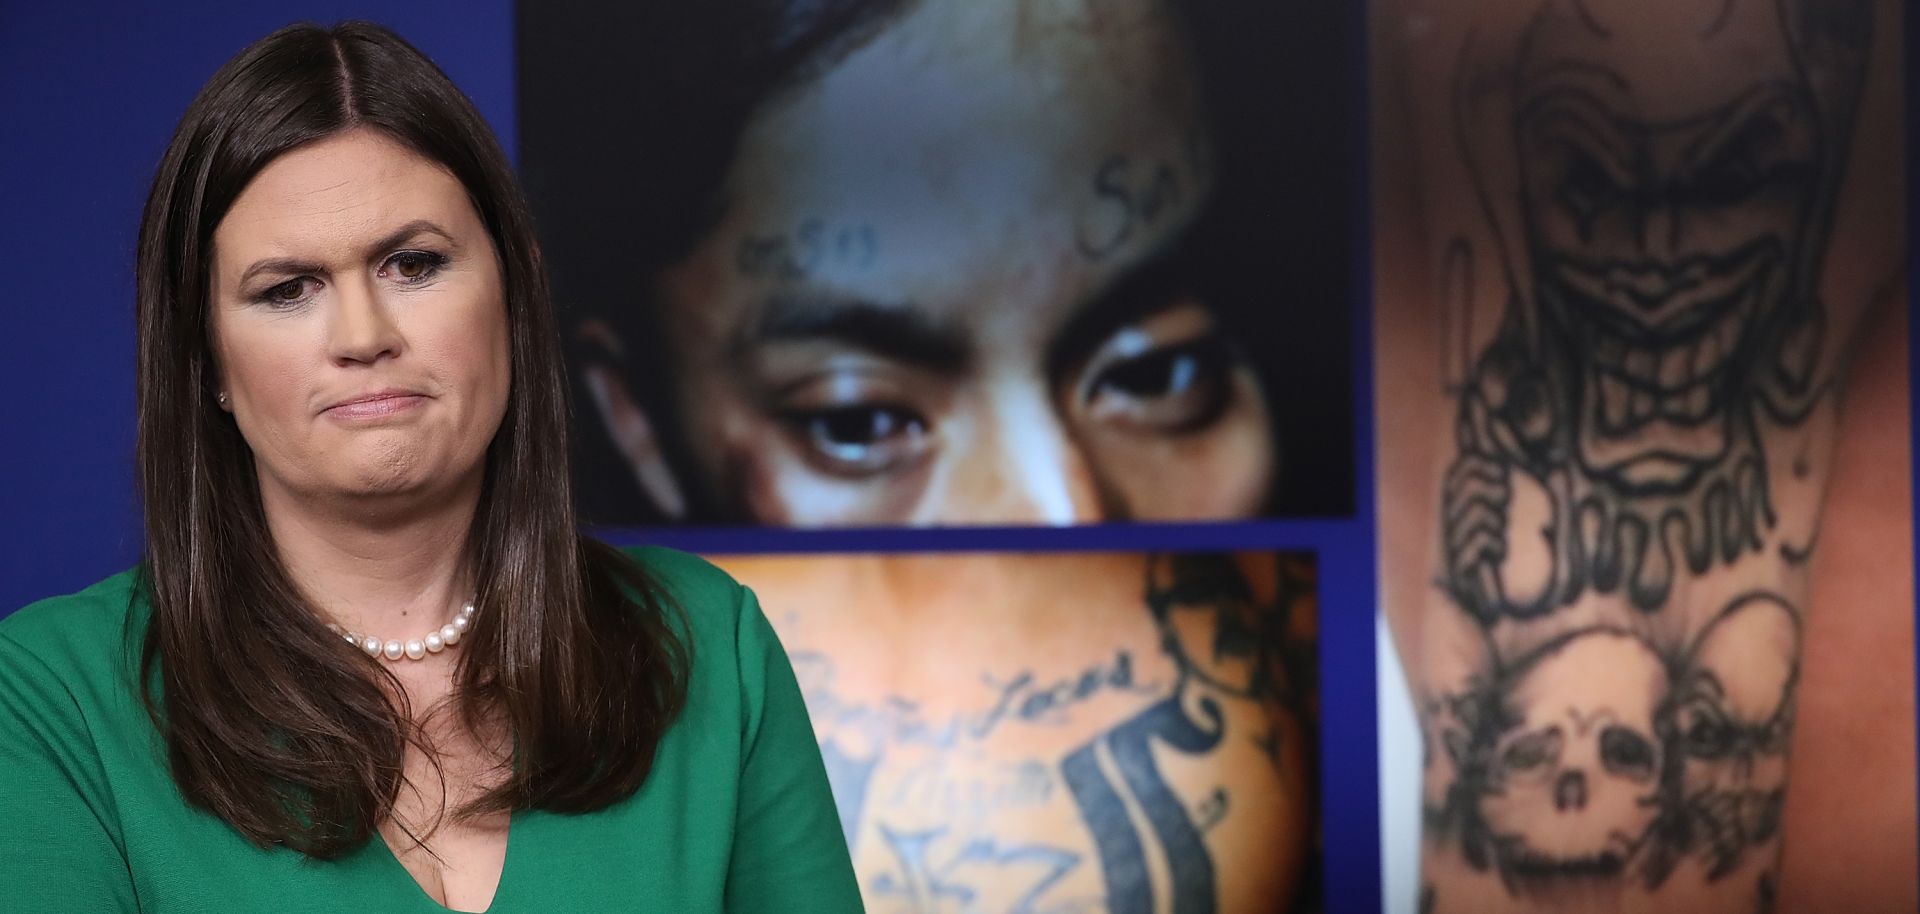 White House Press Secretary Sarah Huckabee Sanders stands in front of photos from the MS-13 gang during a White House daily briefing July 27, 2017.